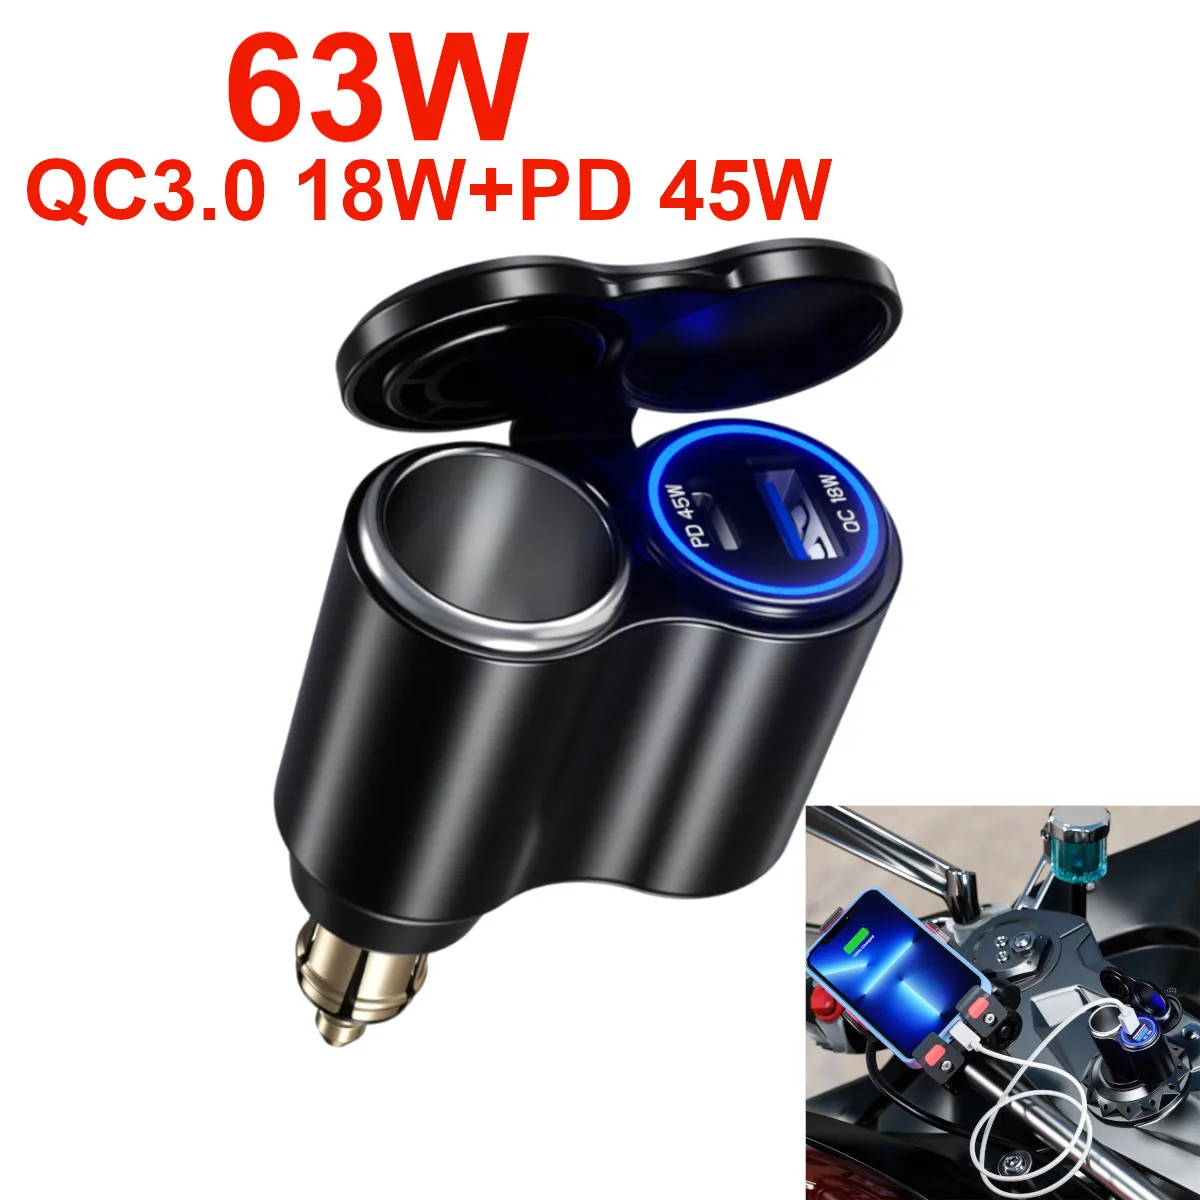 

12-24V QC3.0 +PD 3 in 1 Car Cigarette Lighter Power Adapter Fast Charger Sockets with LED Light for Truck Boat RV Bus Motorcylce